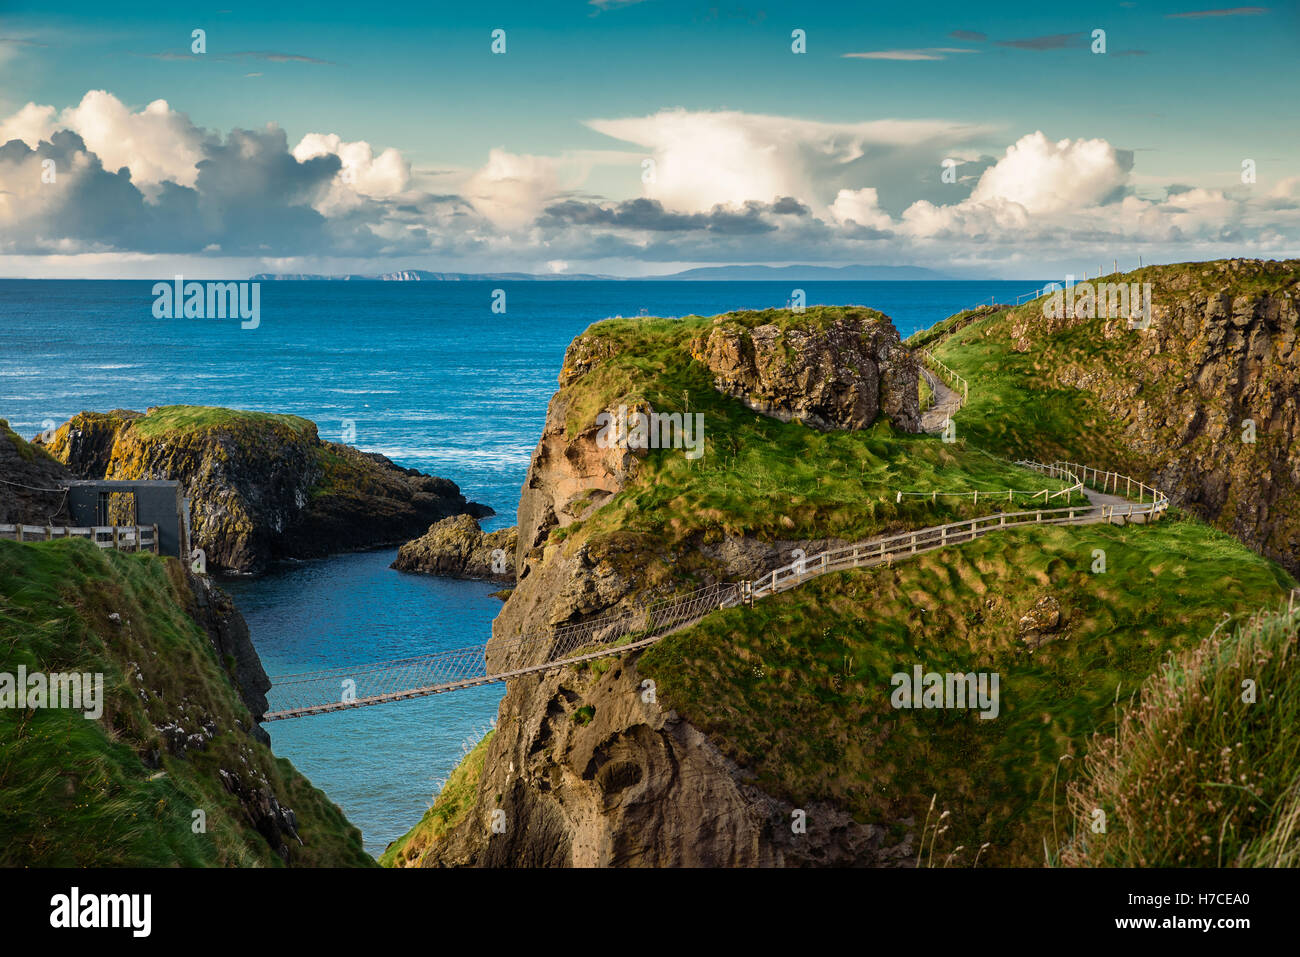 Carrick-a-rede rope bridge, Famous place in Northern Ireland Stock Photo -  Alamy